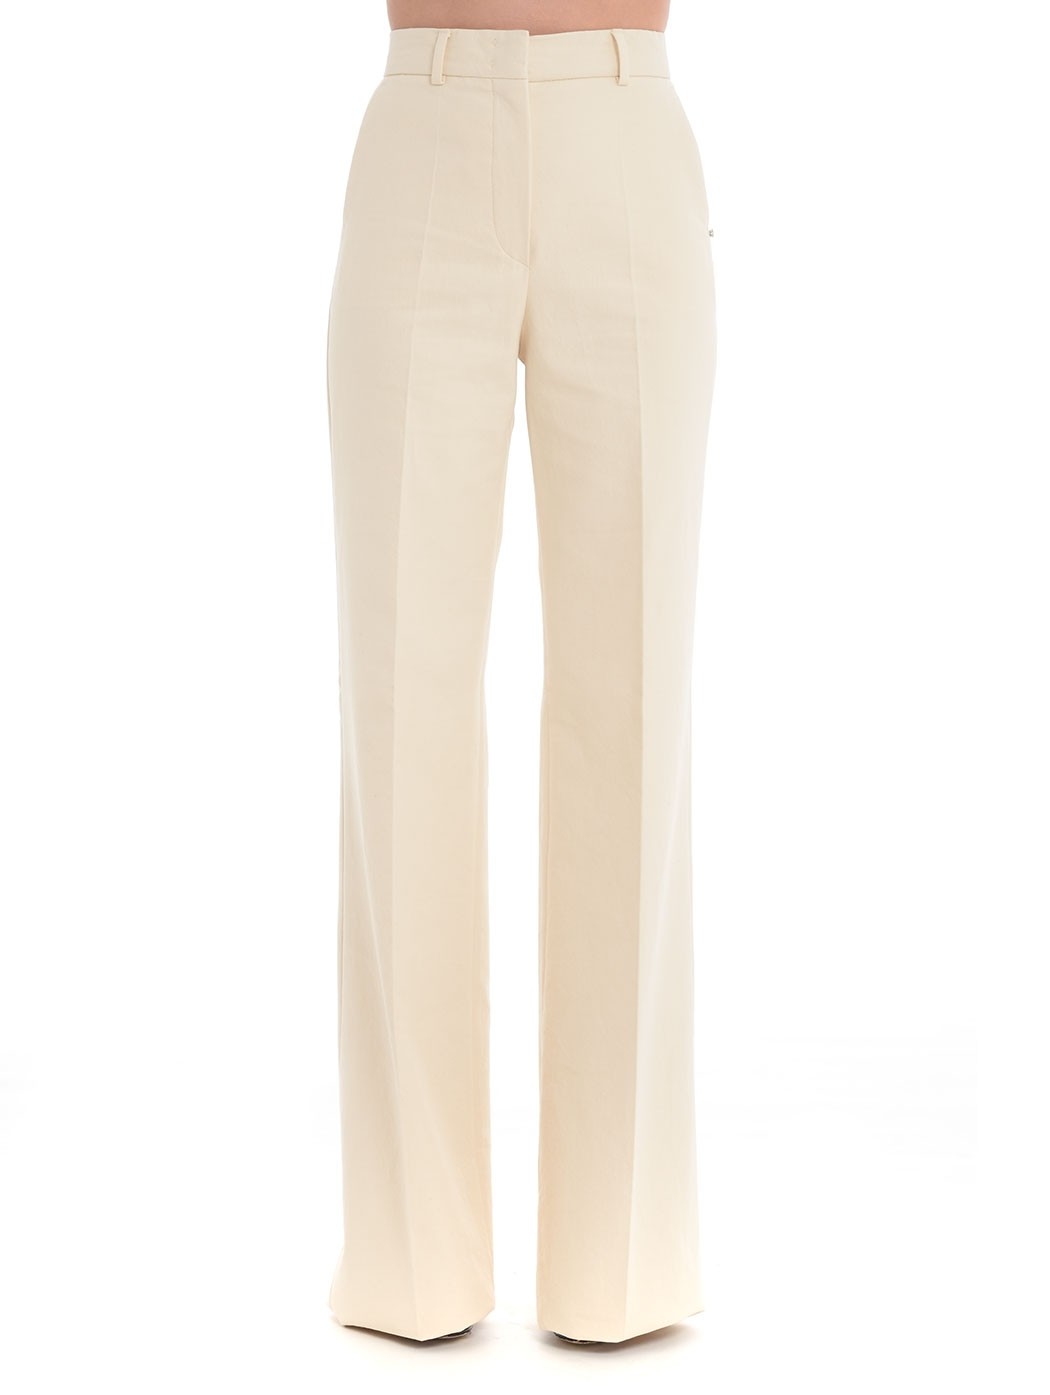  WOMAN TROUSERS,PALAZZO TROUSERS,SKINNY TROUSERS,MARNI TROUSERS,FORTE FORTE TROUSERS,8PM TROUSERS,MSGM TROUSERS,CROP PANTS  SPORTMAX CANALE